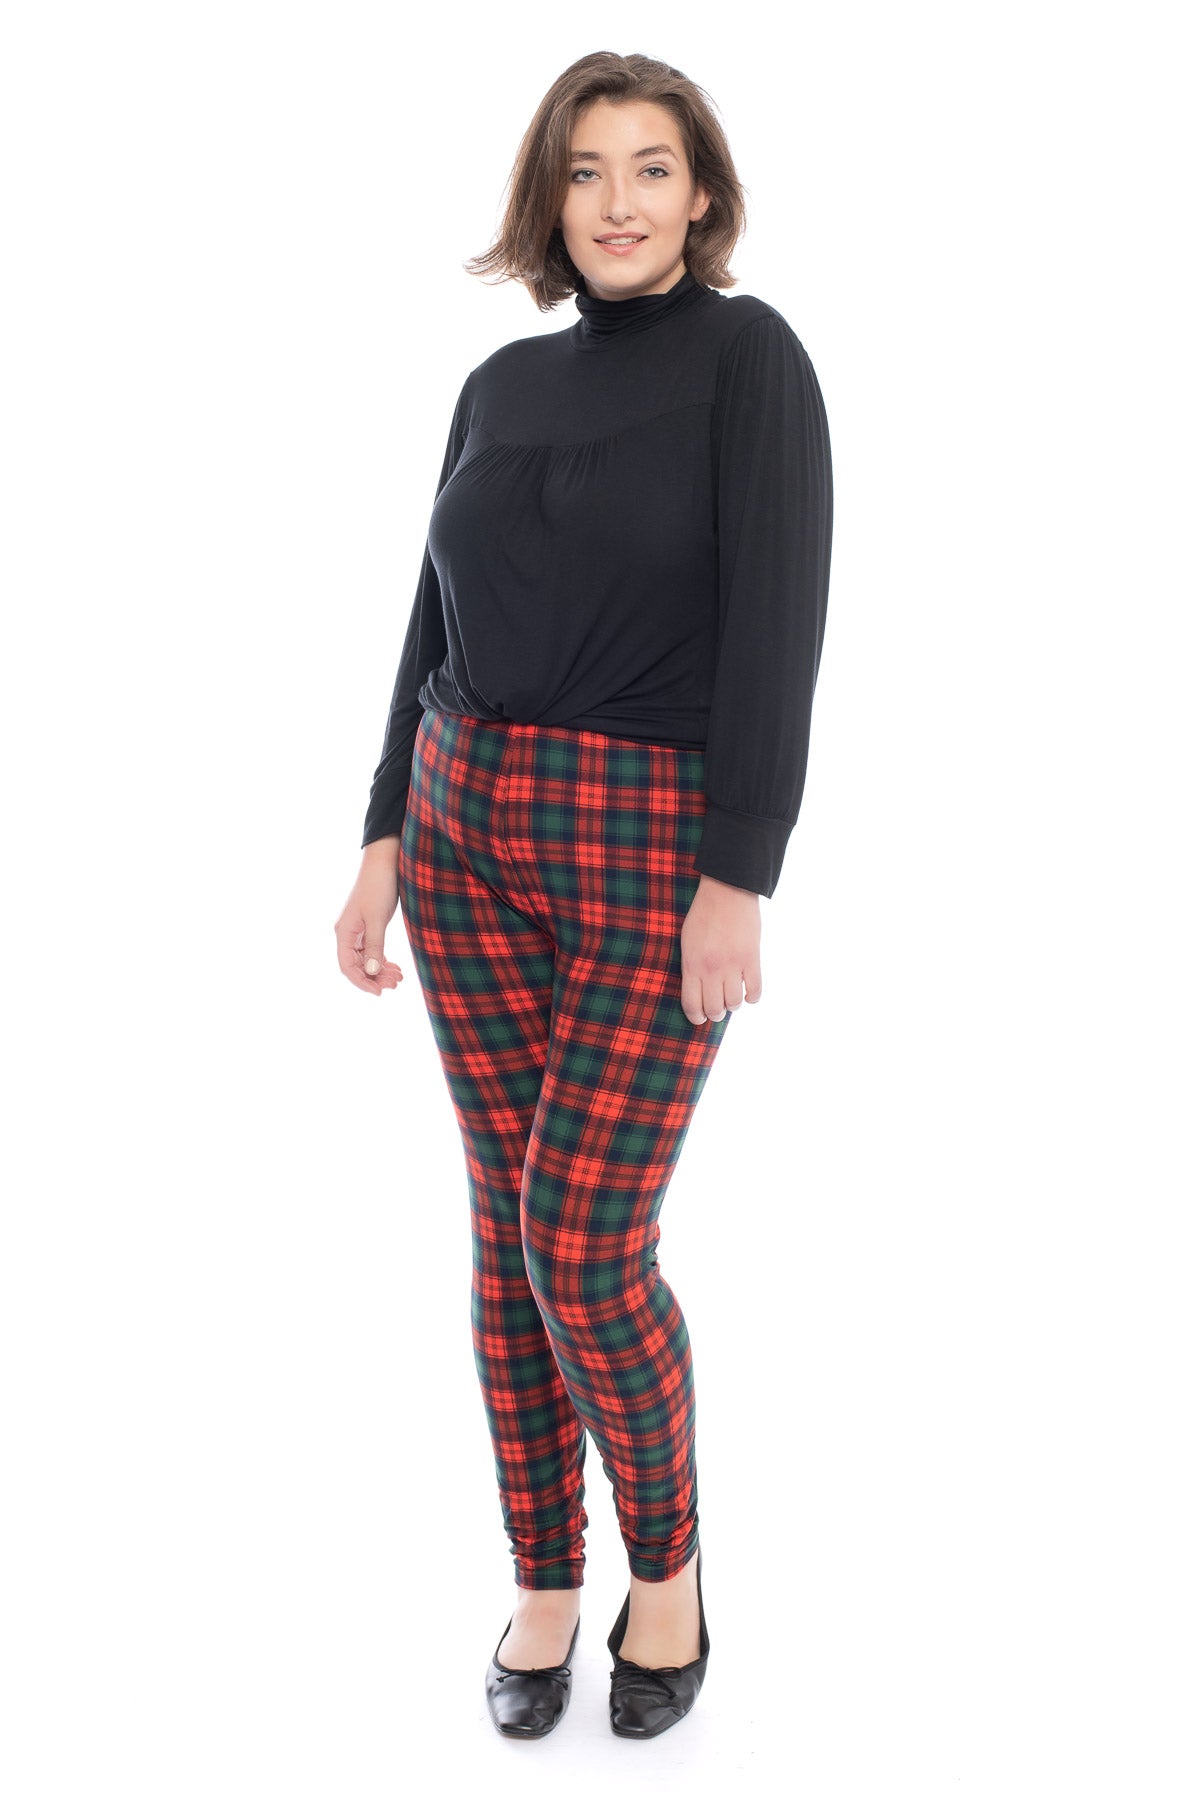 LILLY red/green plaid leggings